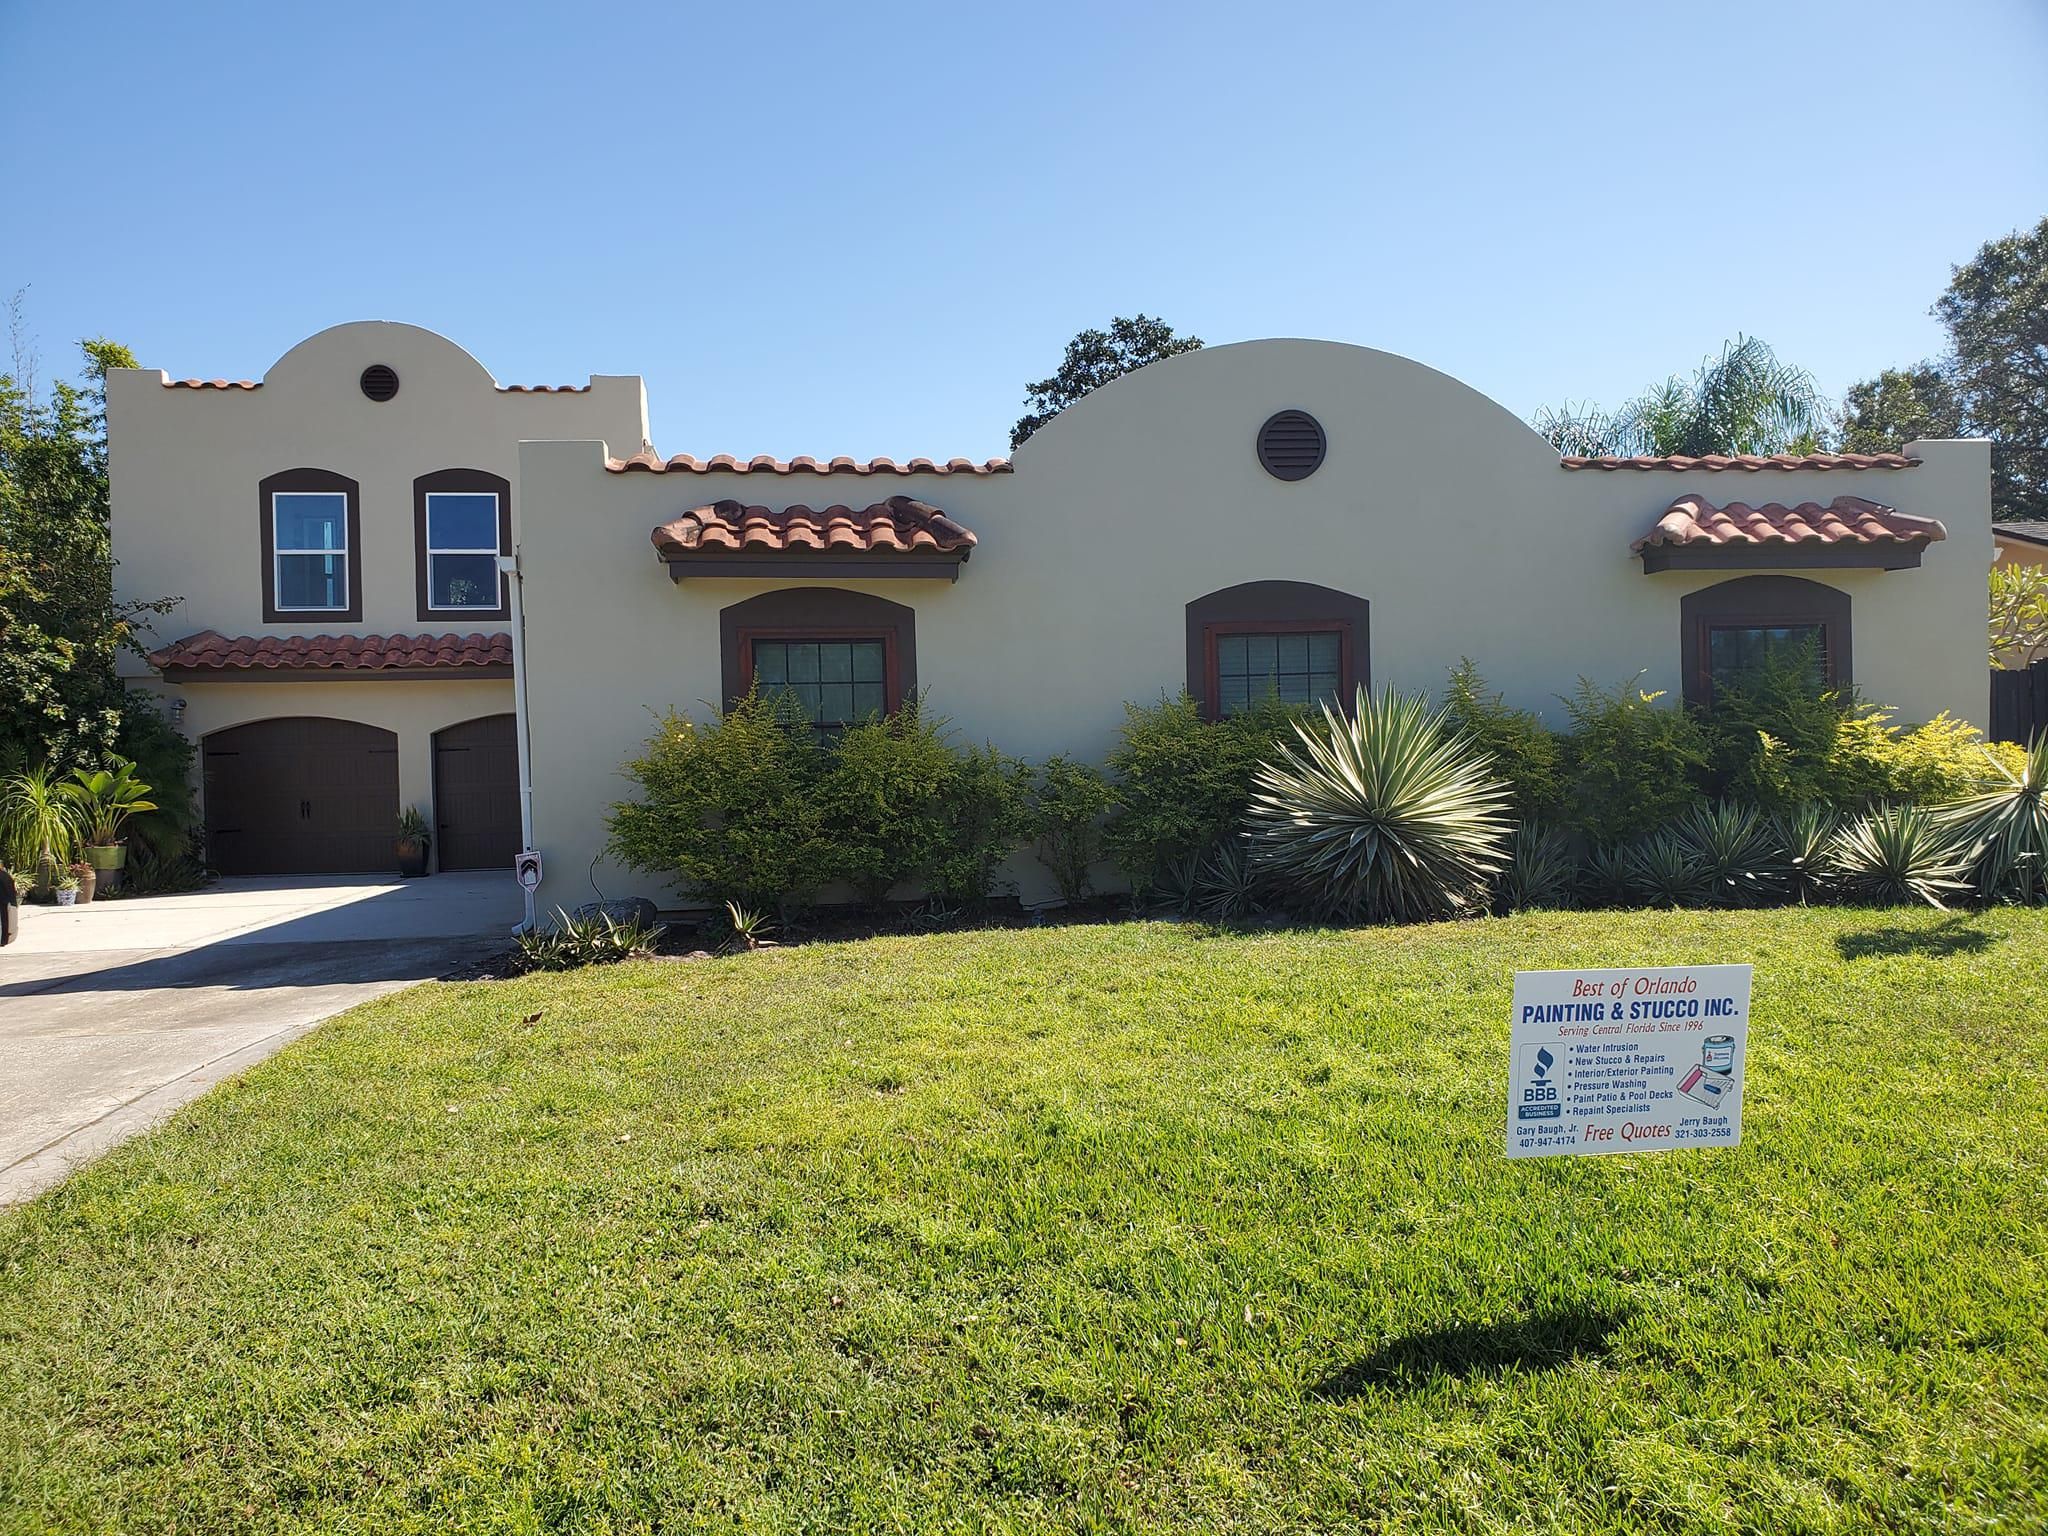 All Photos for Best of Orlando Painting & Stucco Inc in Winter Garden, FL